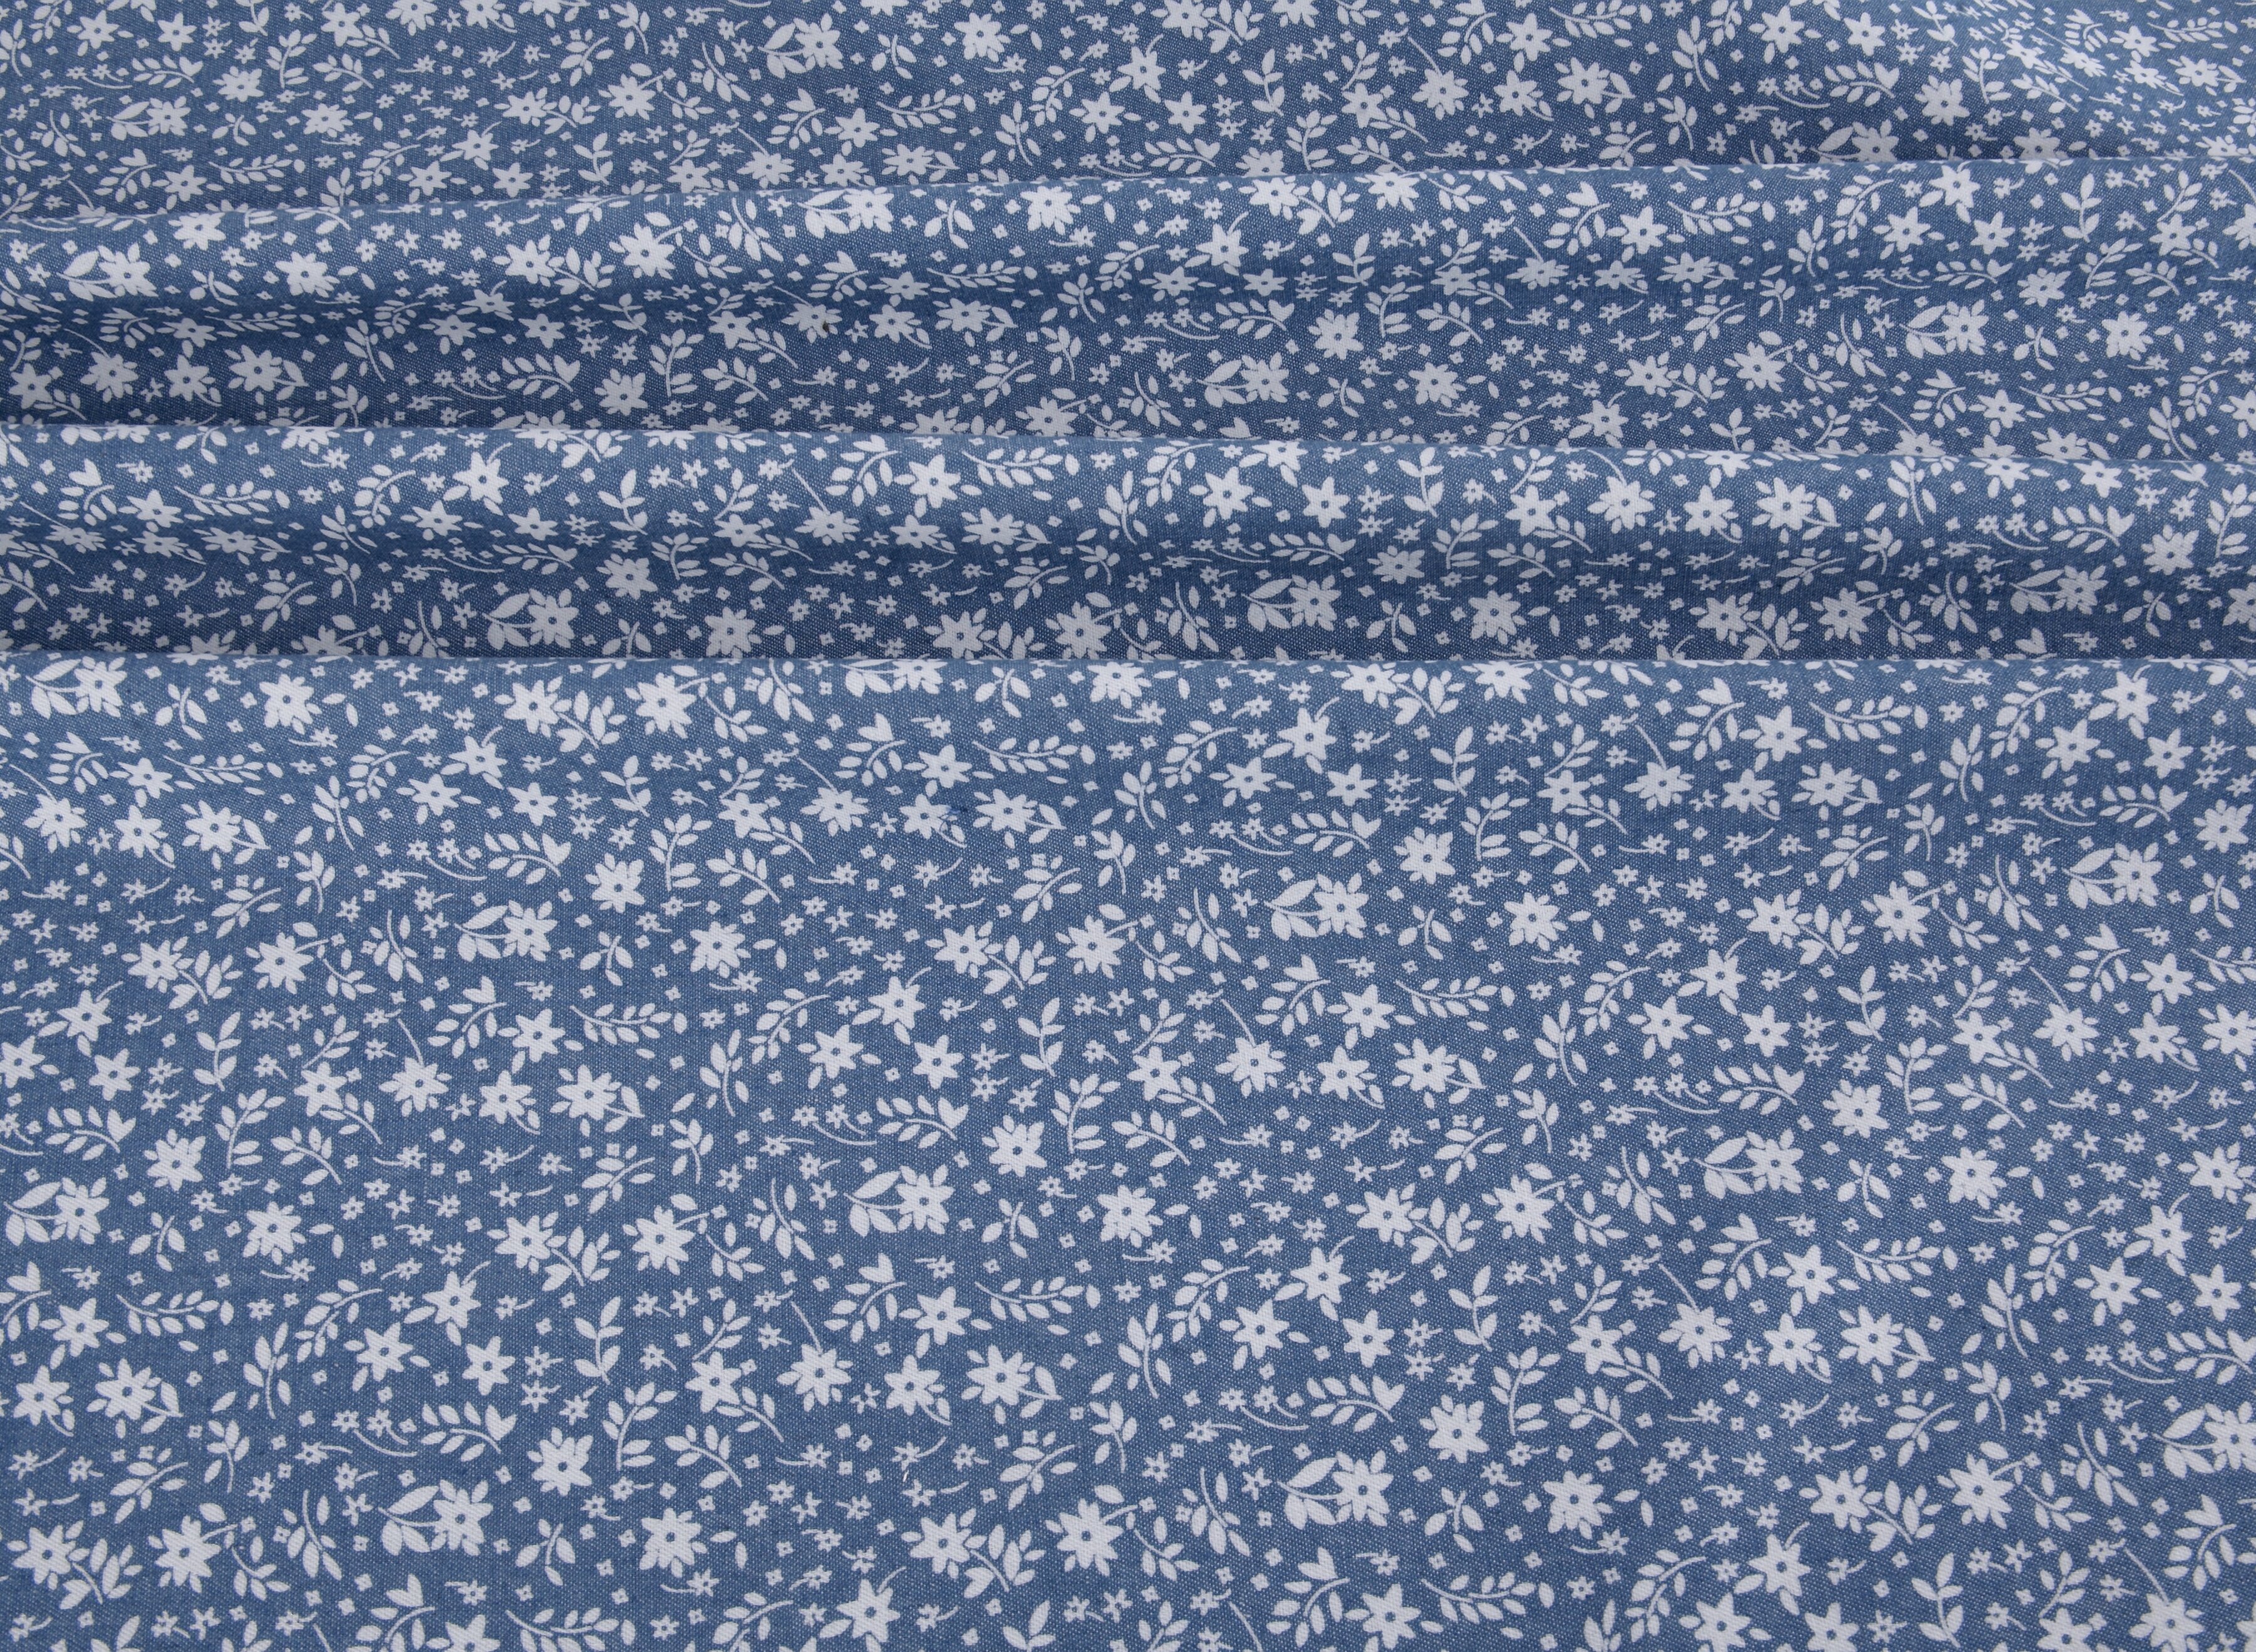 Printed Cotton Chambray - White Floral